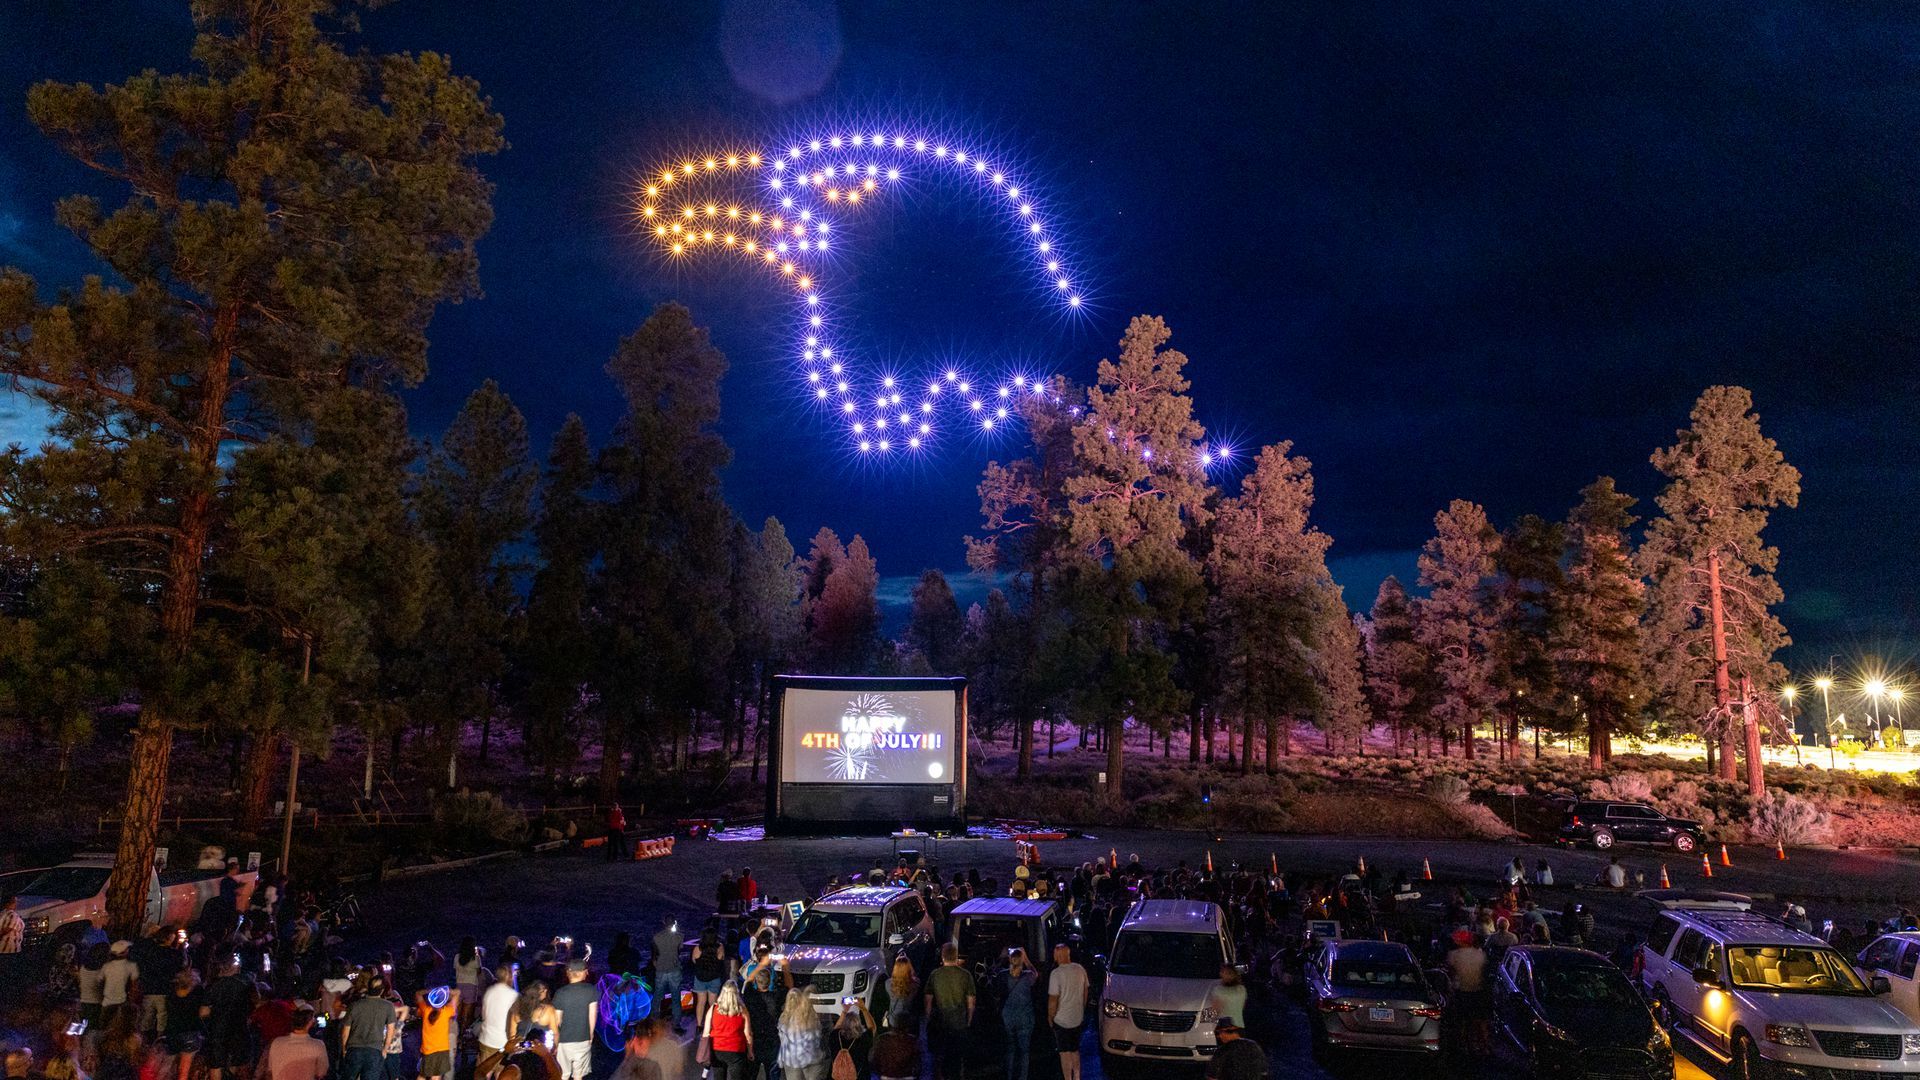 The town of Tusayan, Arizona celebrated July 4, 2021 with its first-ever drone show.